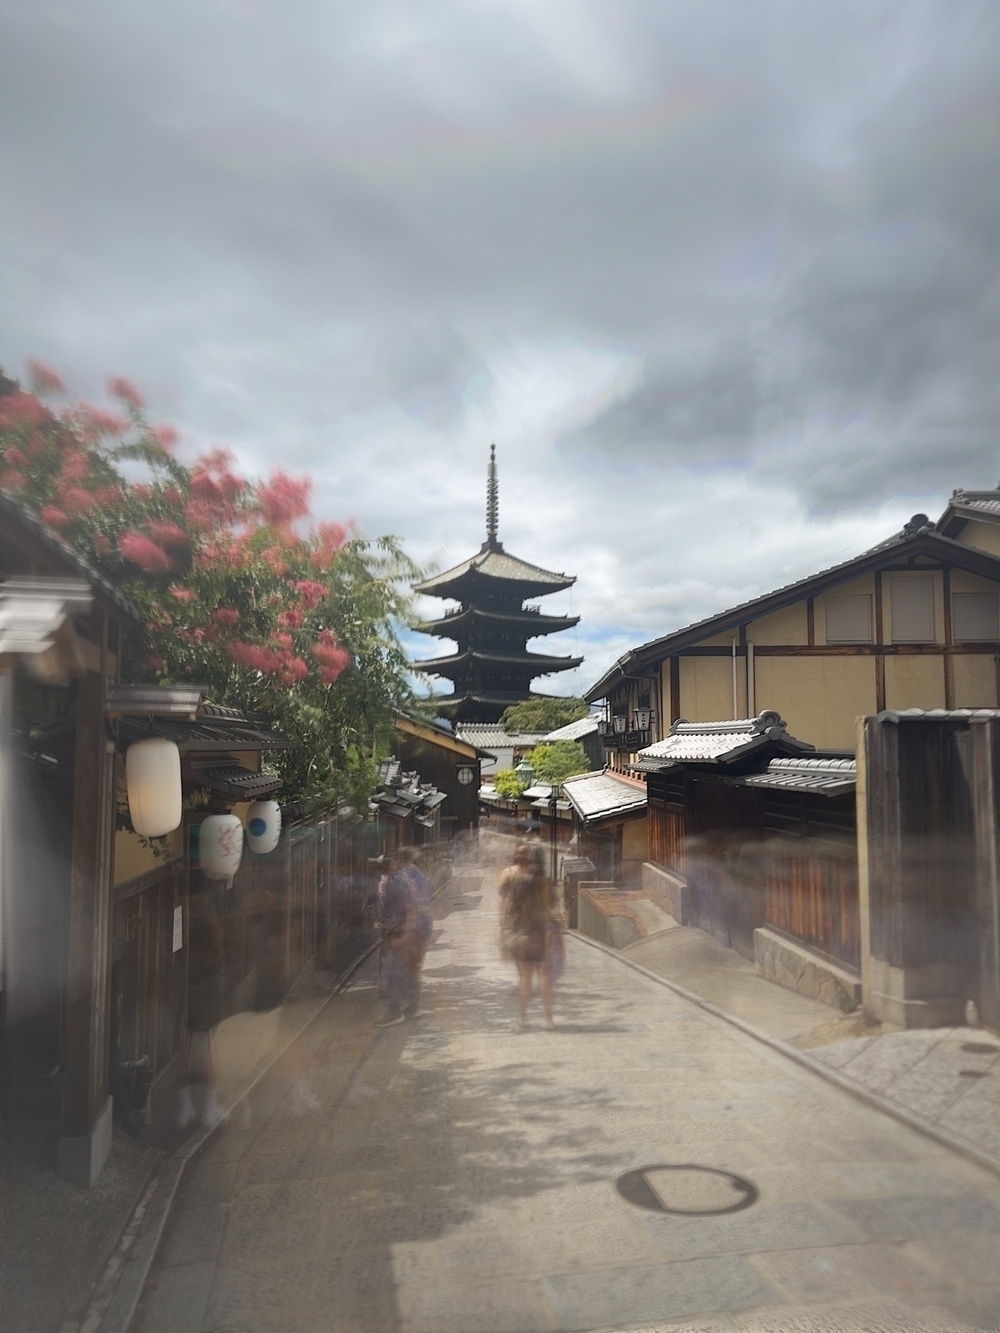 Hōkan-ji Temple in Kyoto, Japan. Summer around midday. A long exposure to blur the clouds of people giving the shot a ghost like quality.